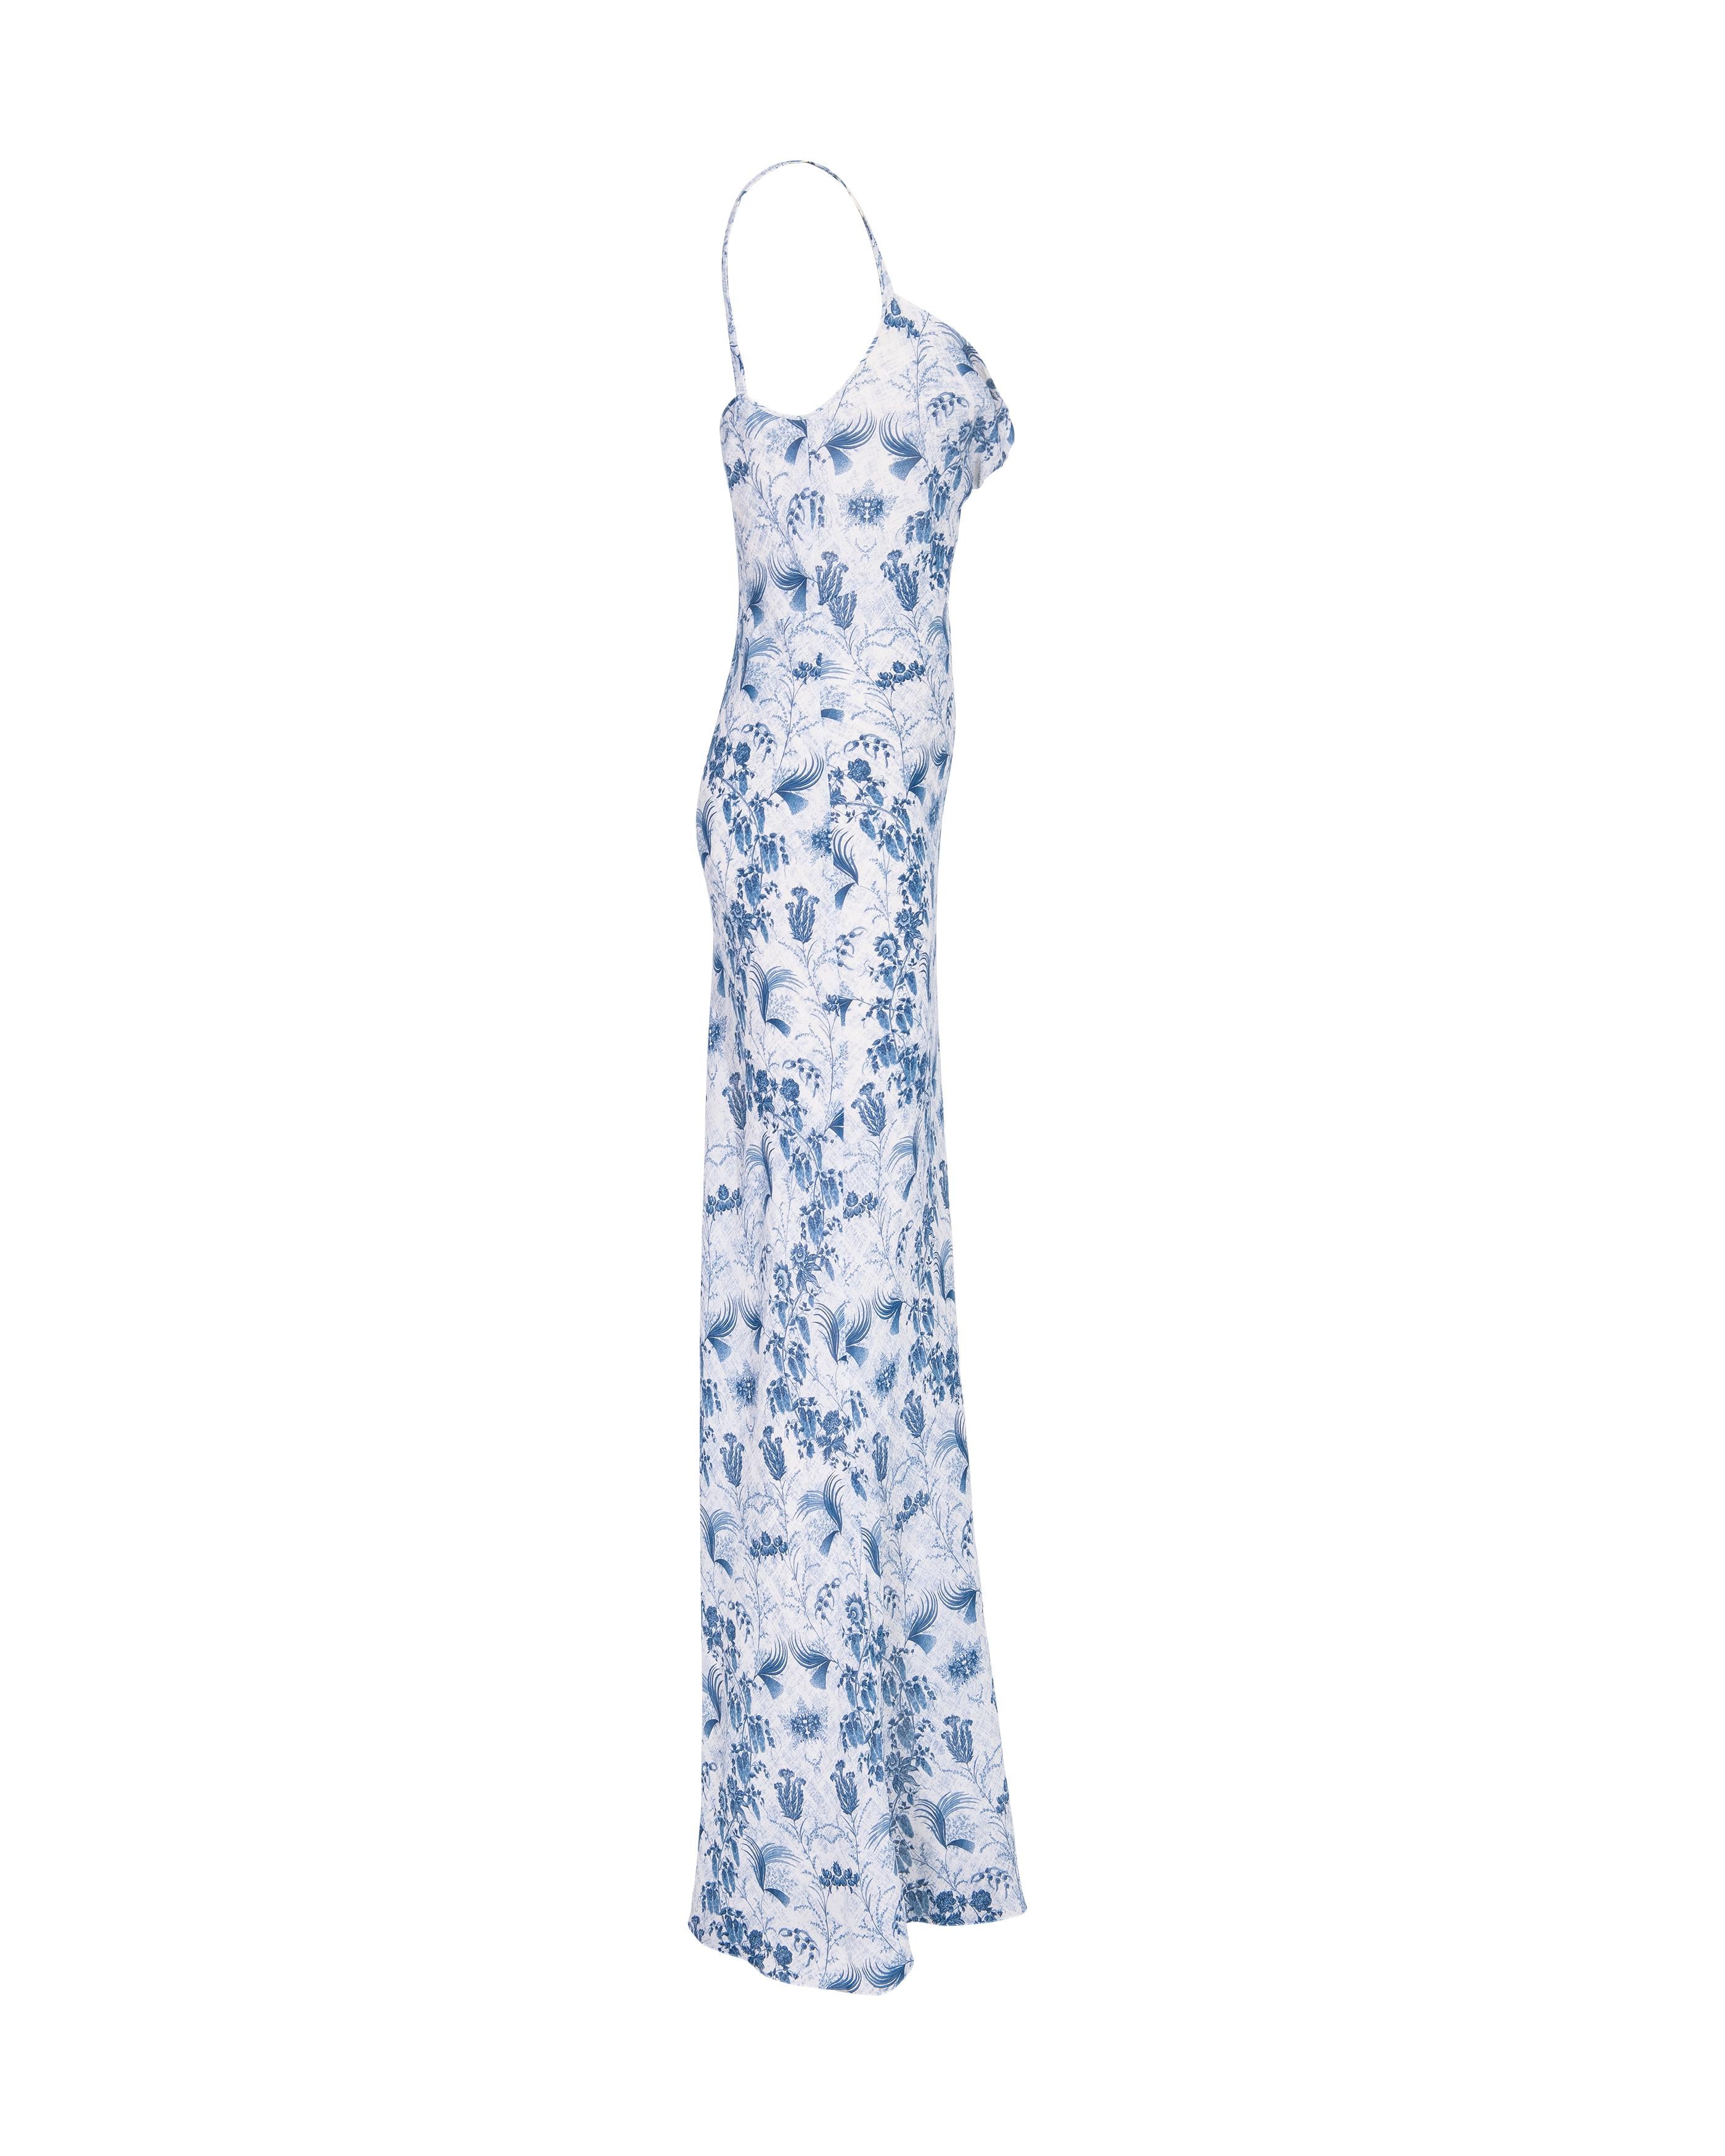 S/S 2001 Christian Dior by John Galliano Blue and White Gown with Bow Detail 6